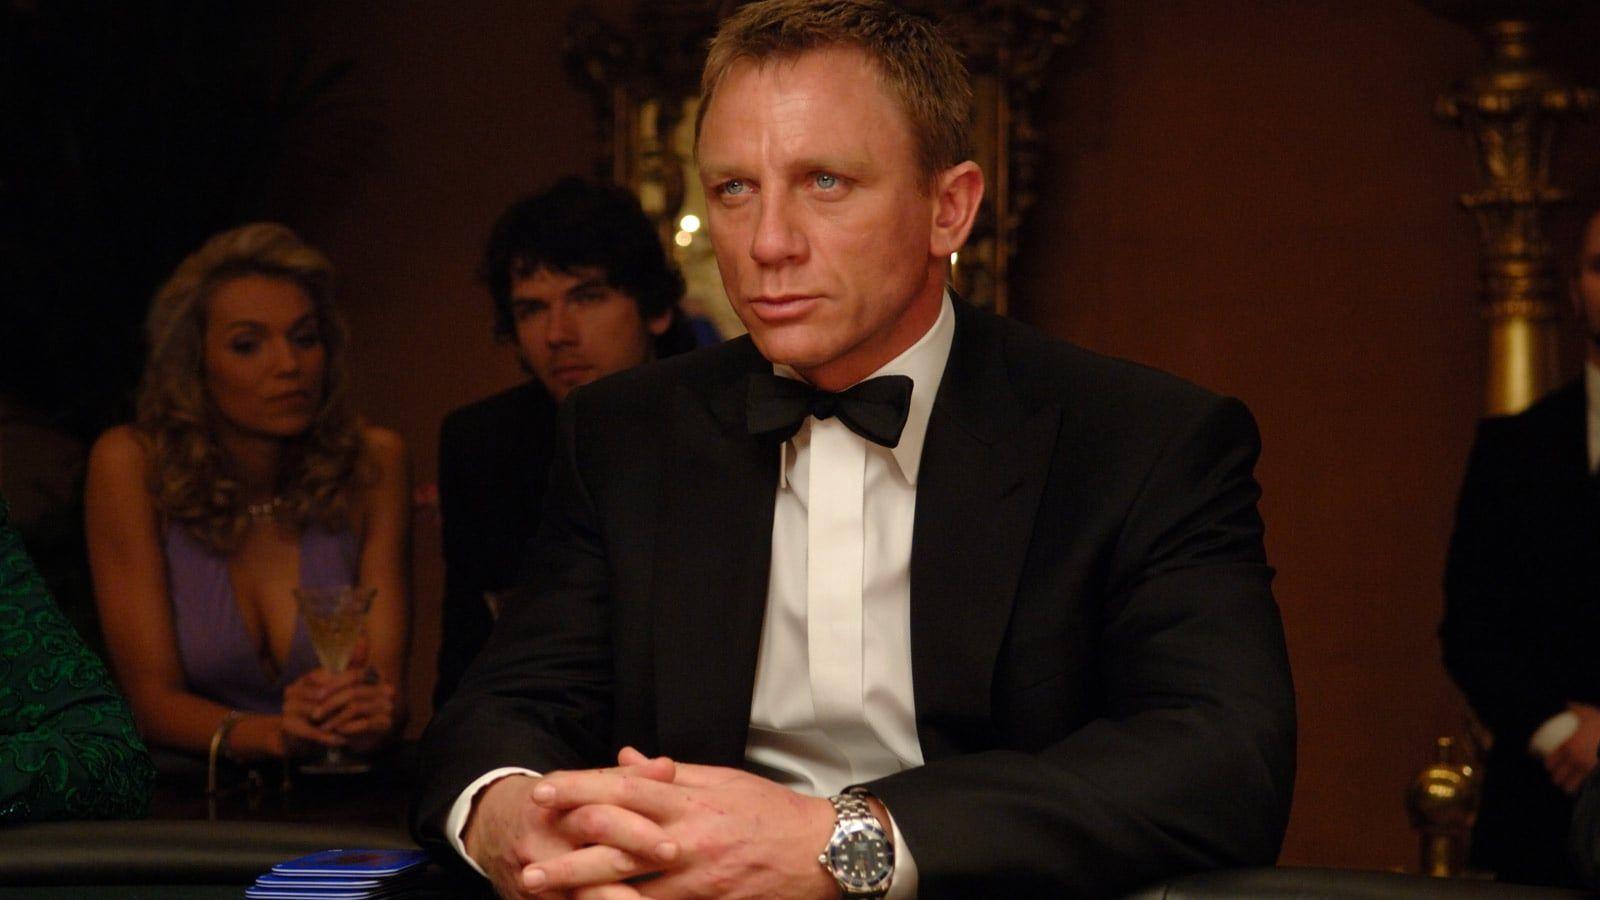 What Does 'No Time To Die' Mean? Bond 25 Title Explained